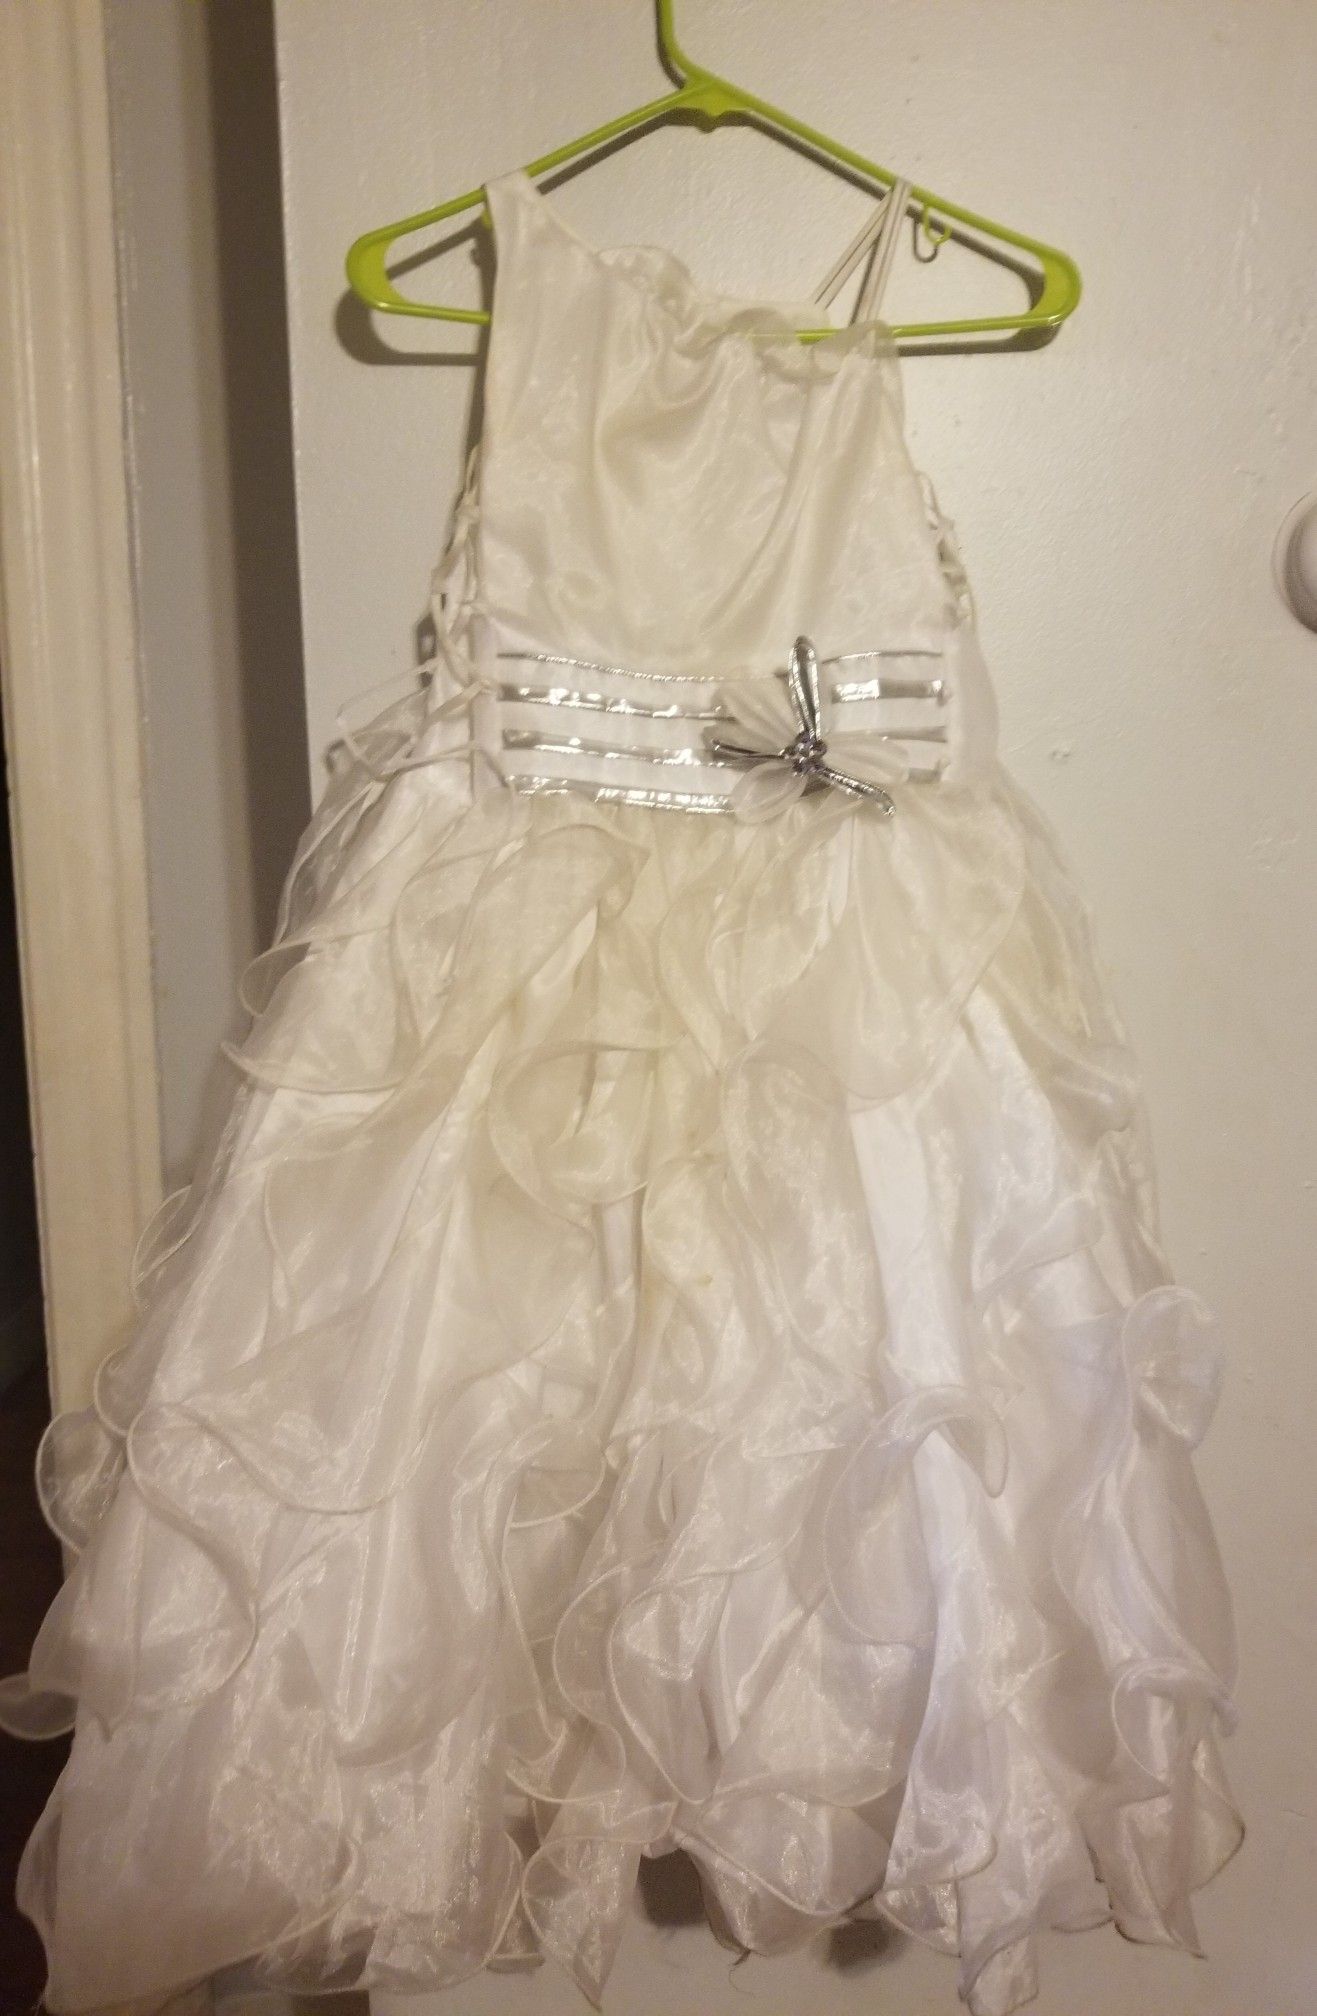 Girls white dress size 8 used once for a wedding .